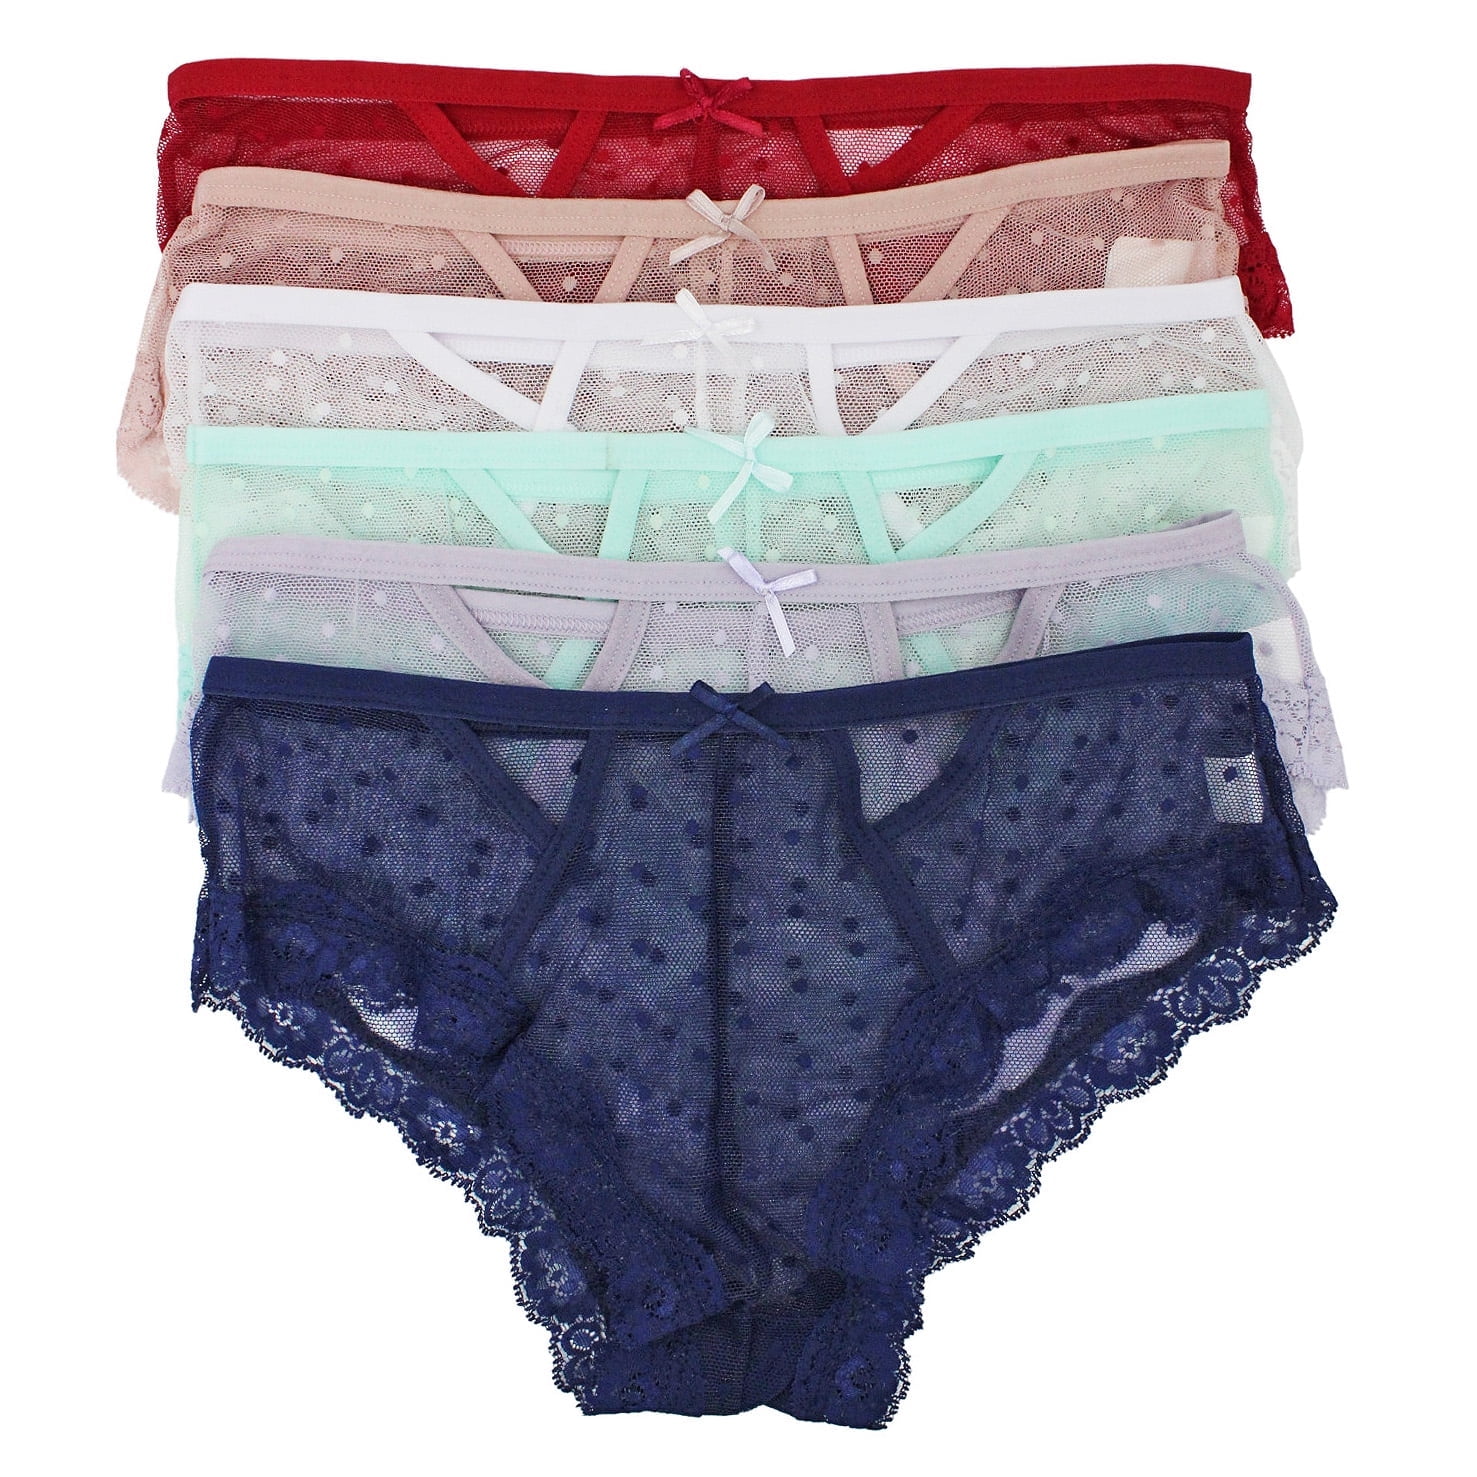 Morvia Variety Pack of 10 Women Hipster Briefs Boyshorts Bikinis Underwear  Panties With Coverage Stretchy Cotton Lacy Panties